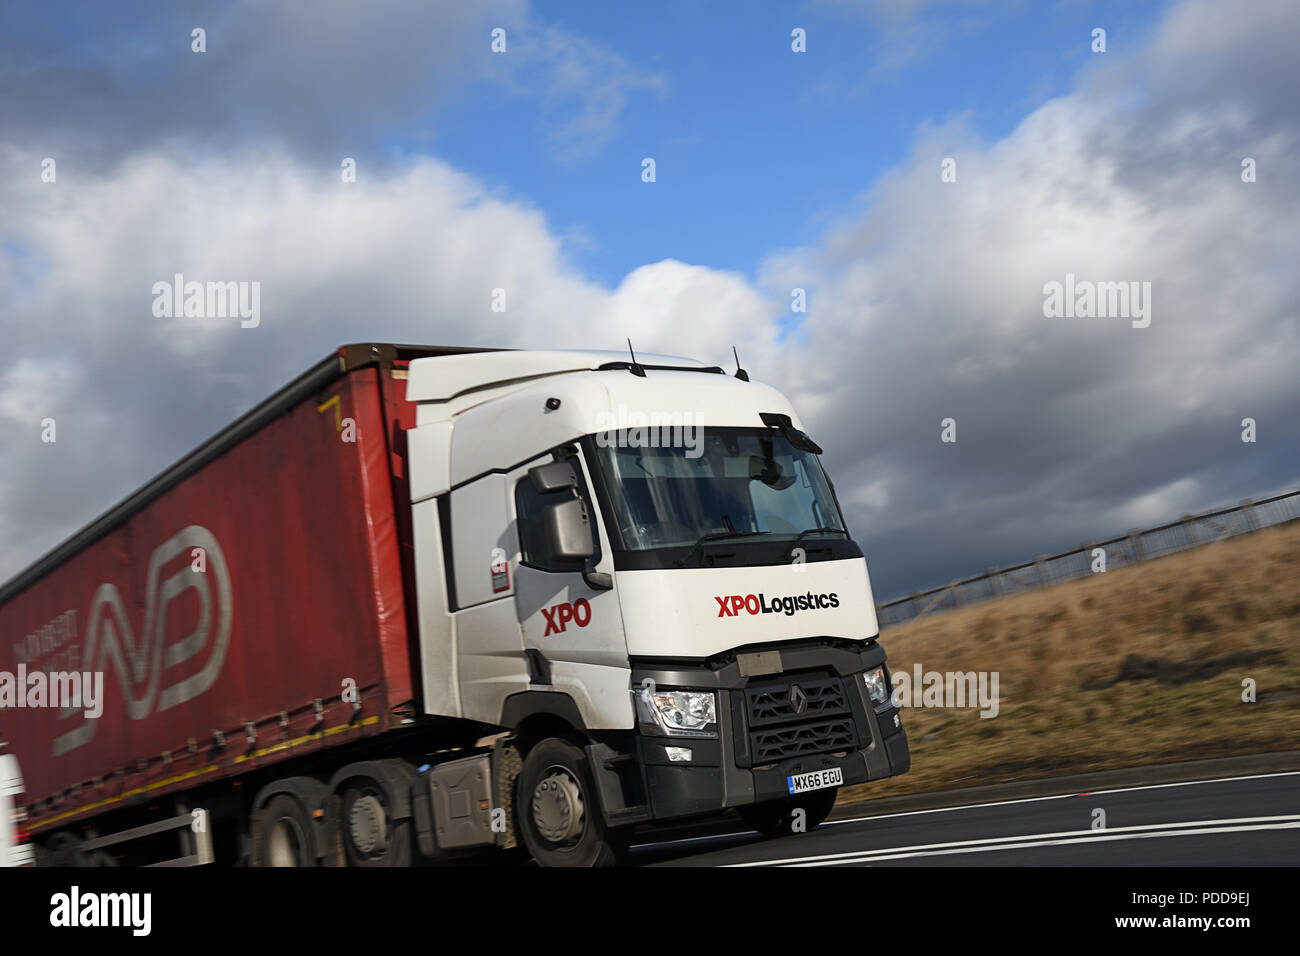 XPO logistica curtainsider Renault camion sulla Woodhead Pass, Yorkshire Foto Stock